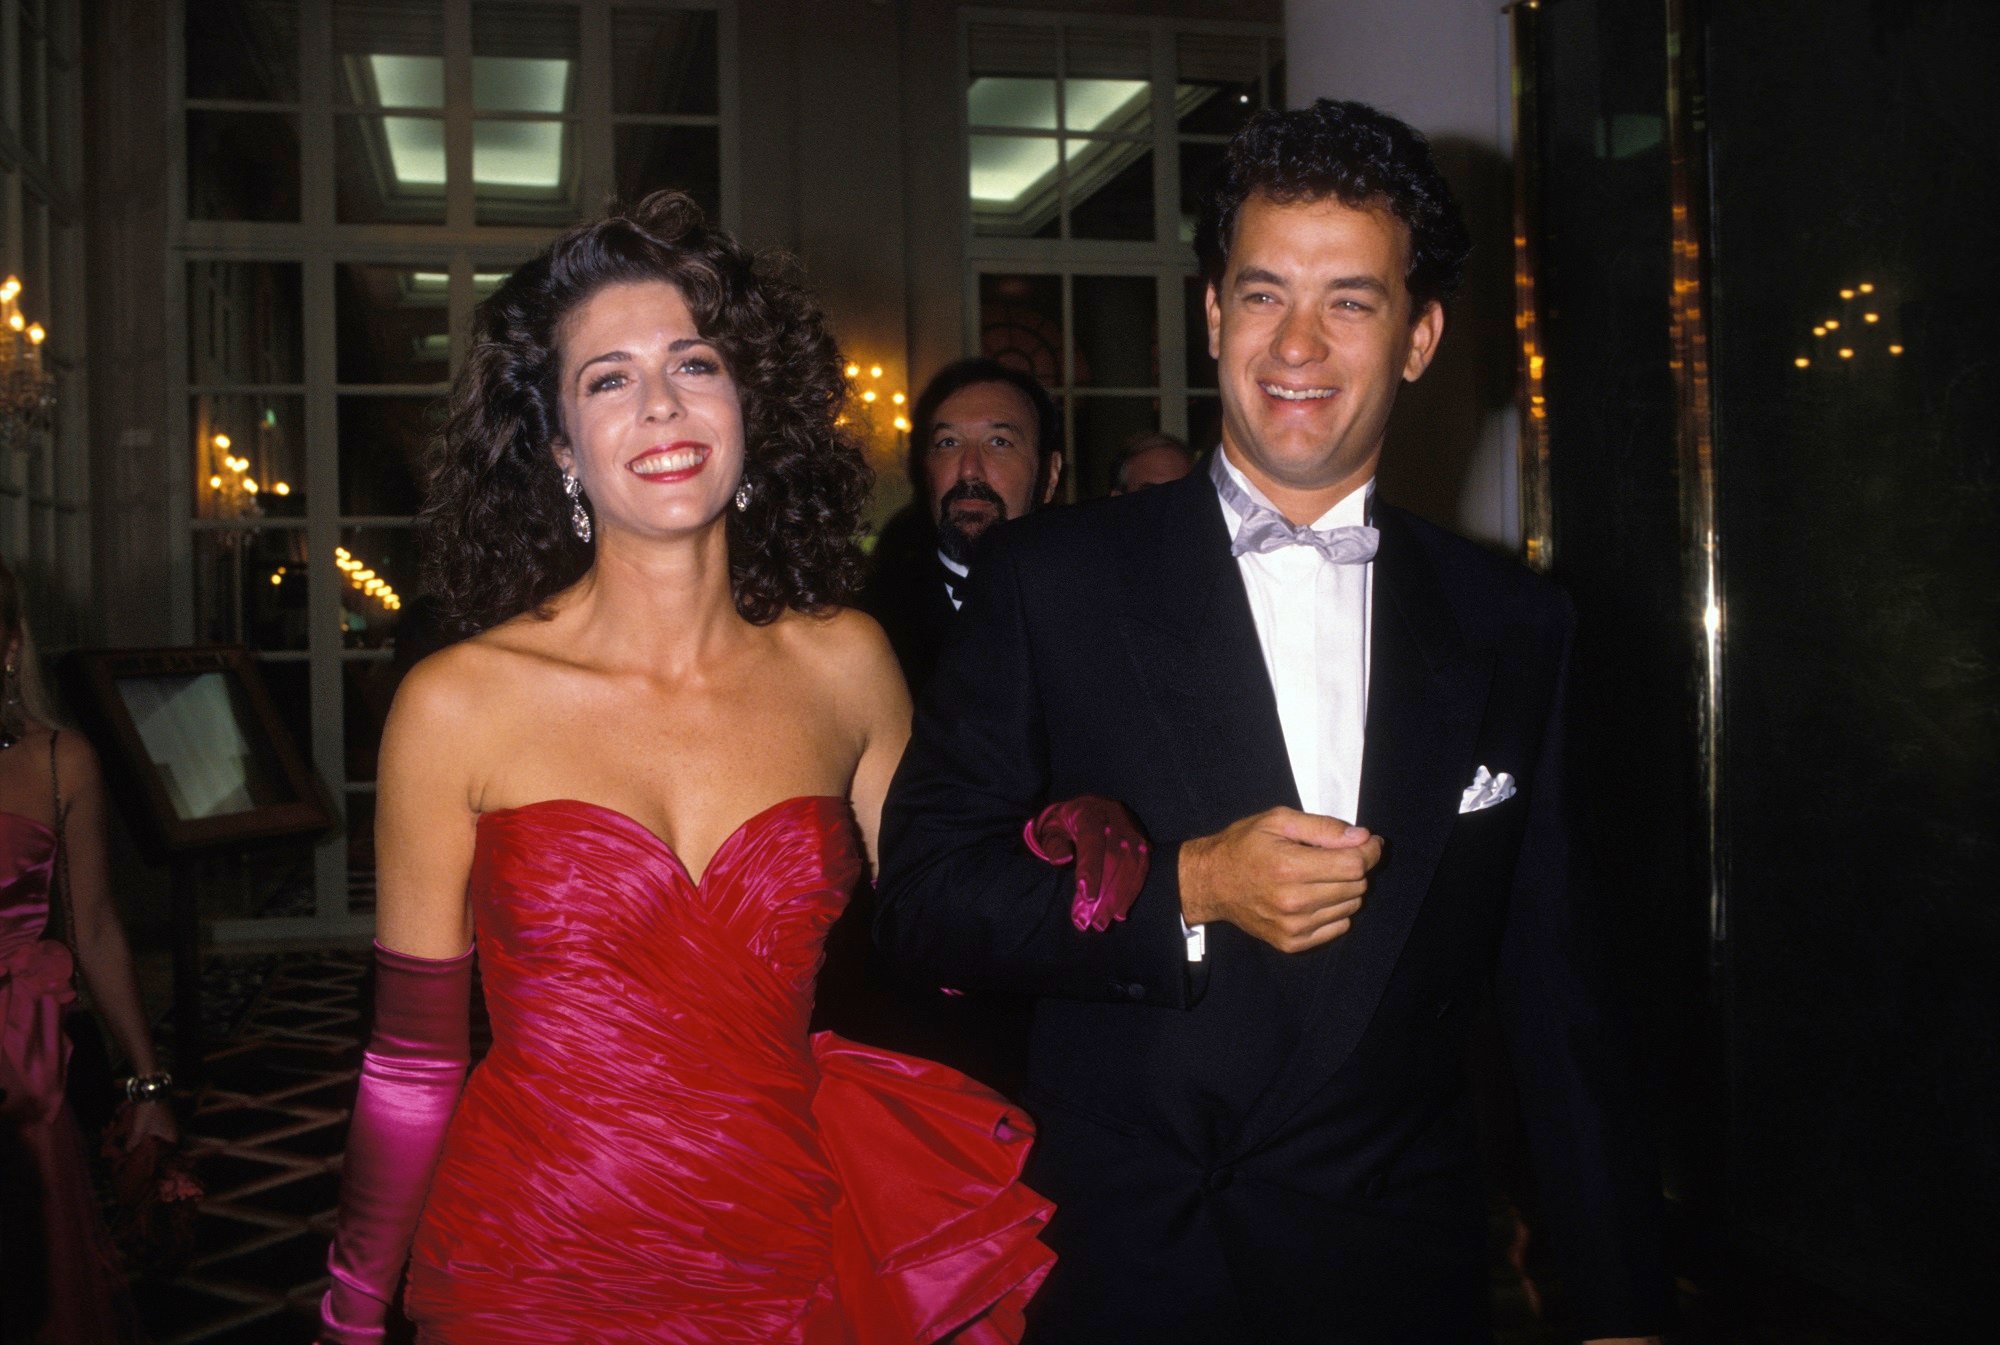 Tom Hanks's wife, Rita Wilson wearig a red dress while Hanks is in a tux